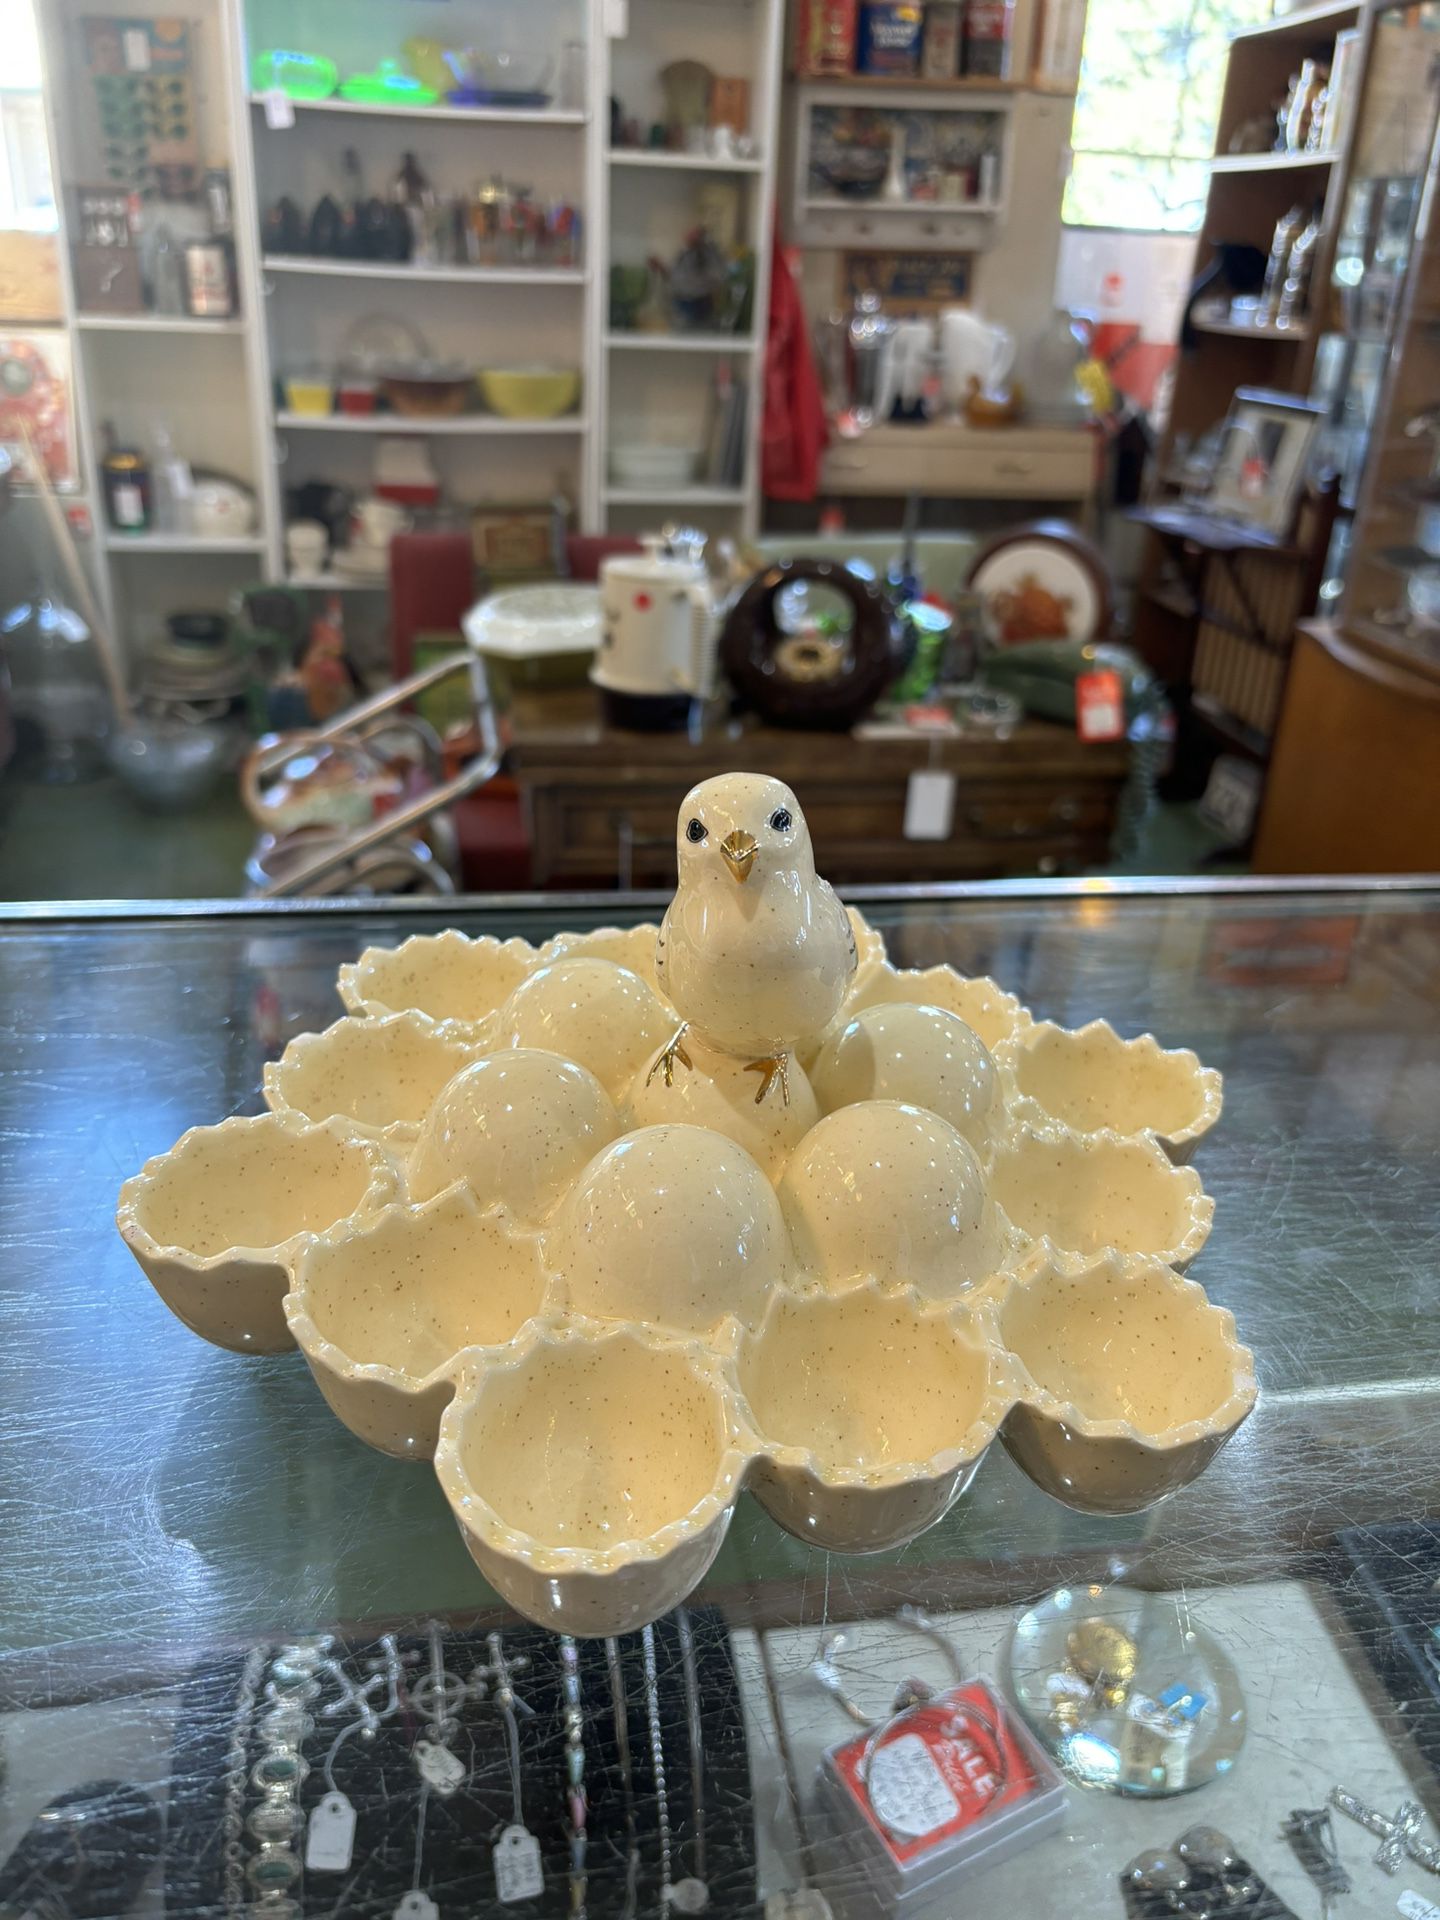 10x6 antique vintage glass egg or deviled egg holder. 25.00.  Johanna at Antiques and More. Located at 316b Main Street Buda. Antiques vintage retro f